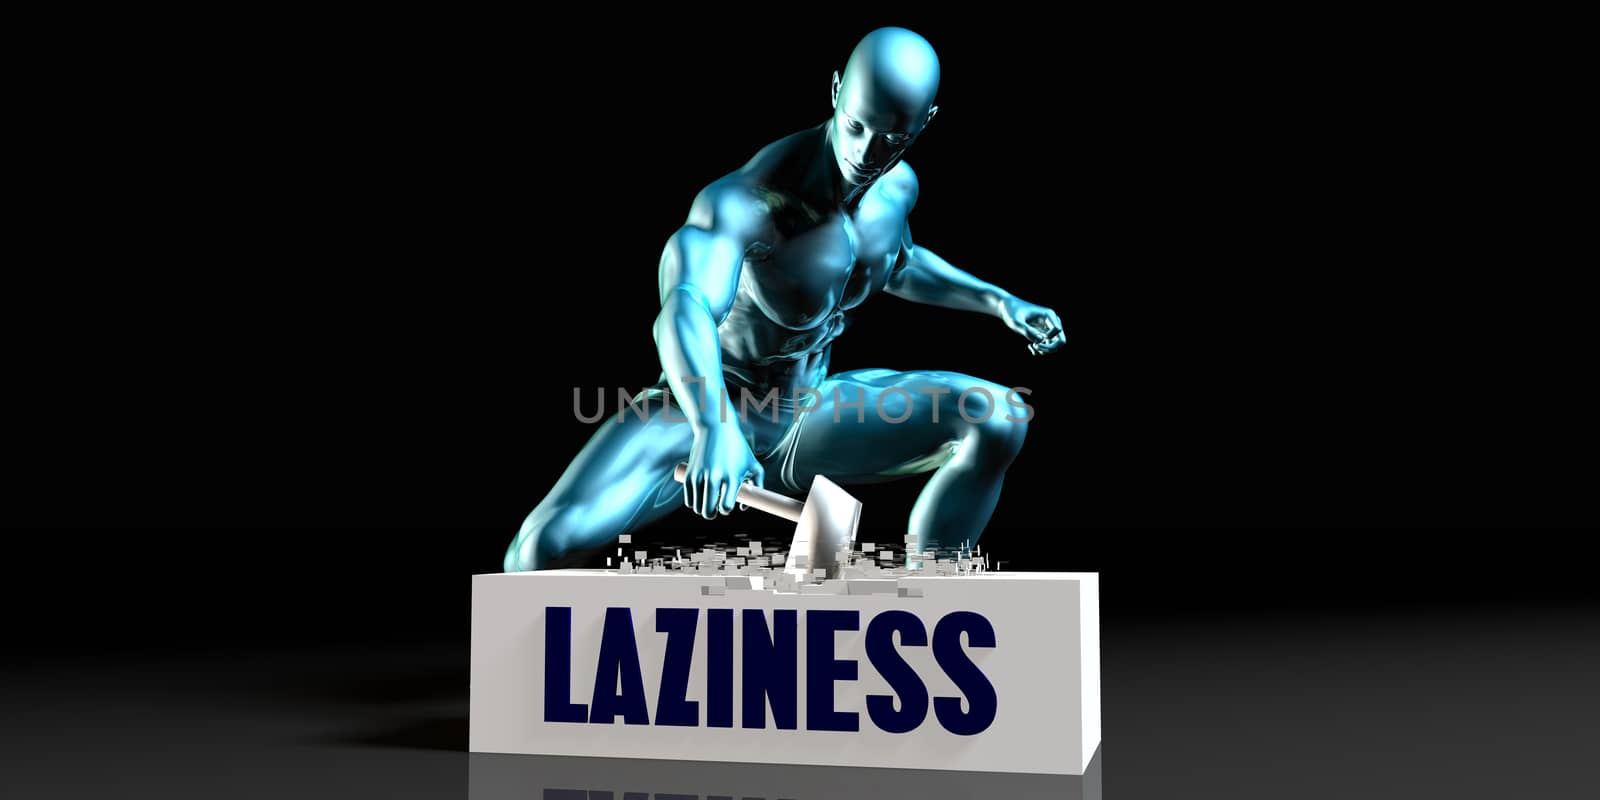 Get Rid of Laziness by kentoh